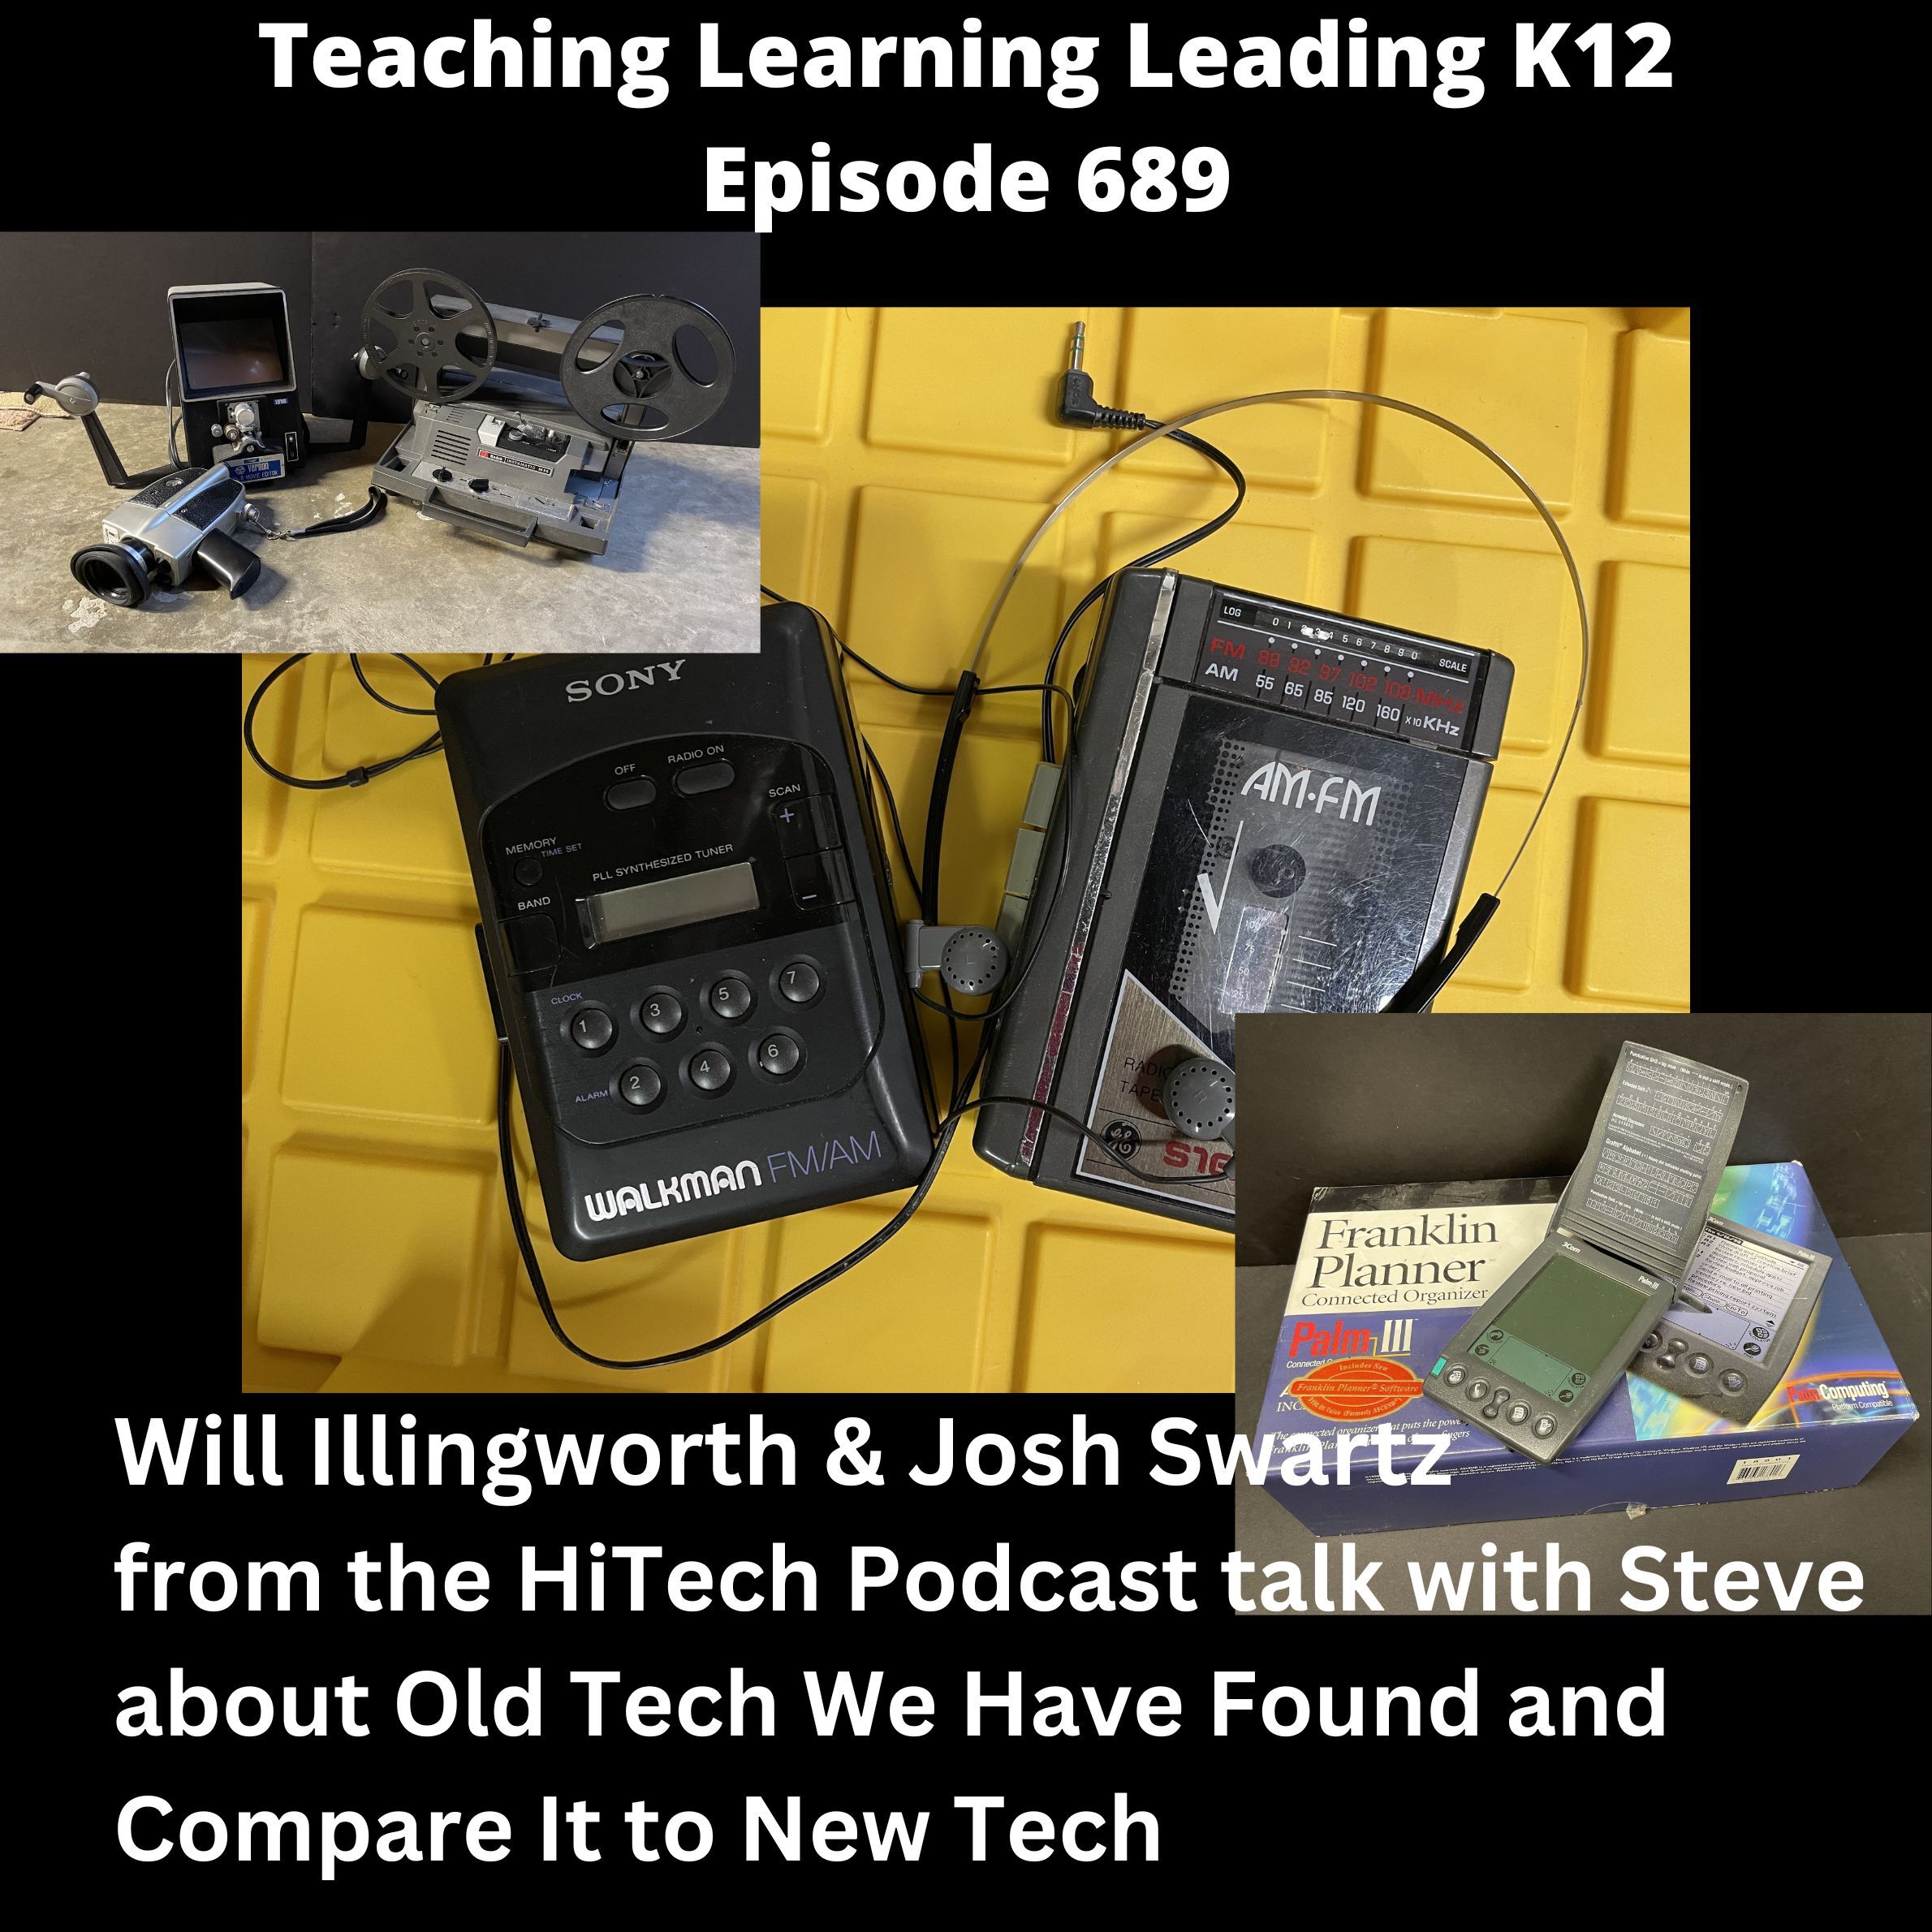 Will Illingworth & Joshua Swartz - the HiTech Podcast - talk with Steve about Old Tech that We have Found and Compare it to New Tech - 689